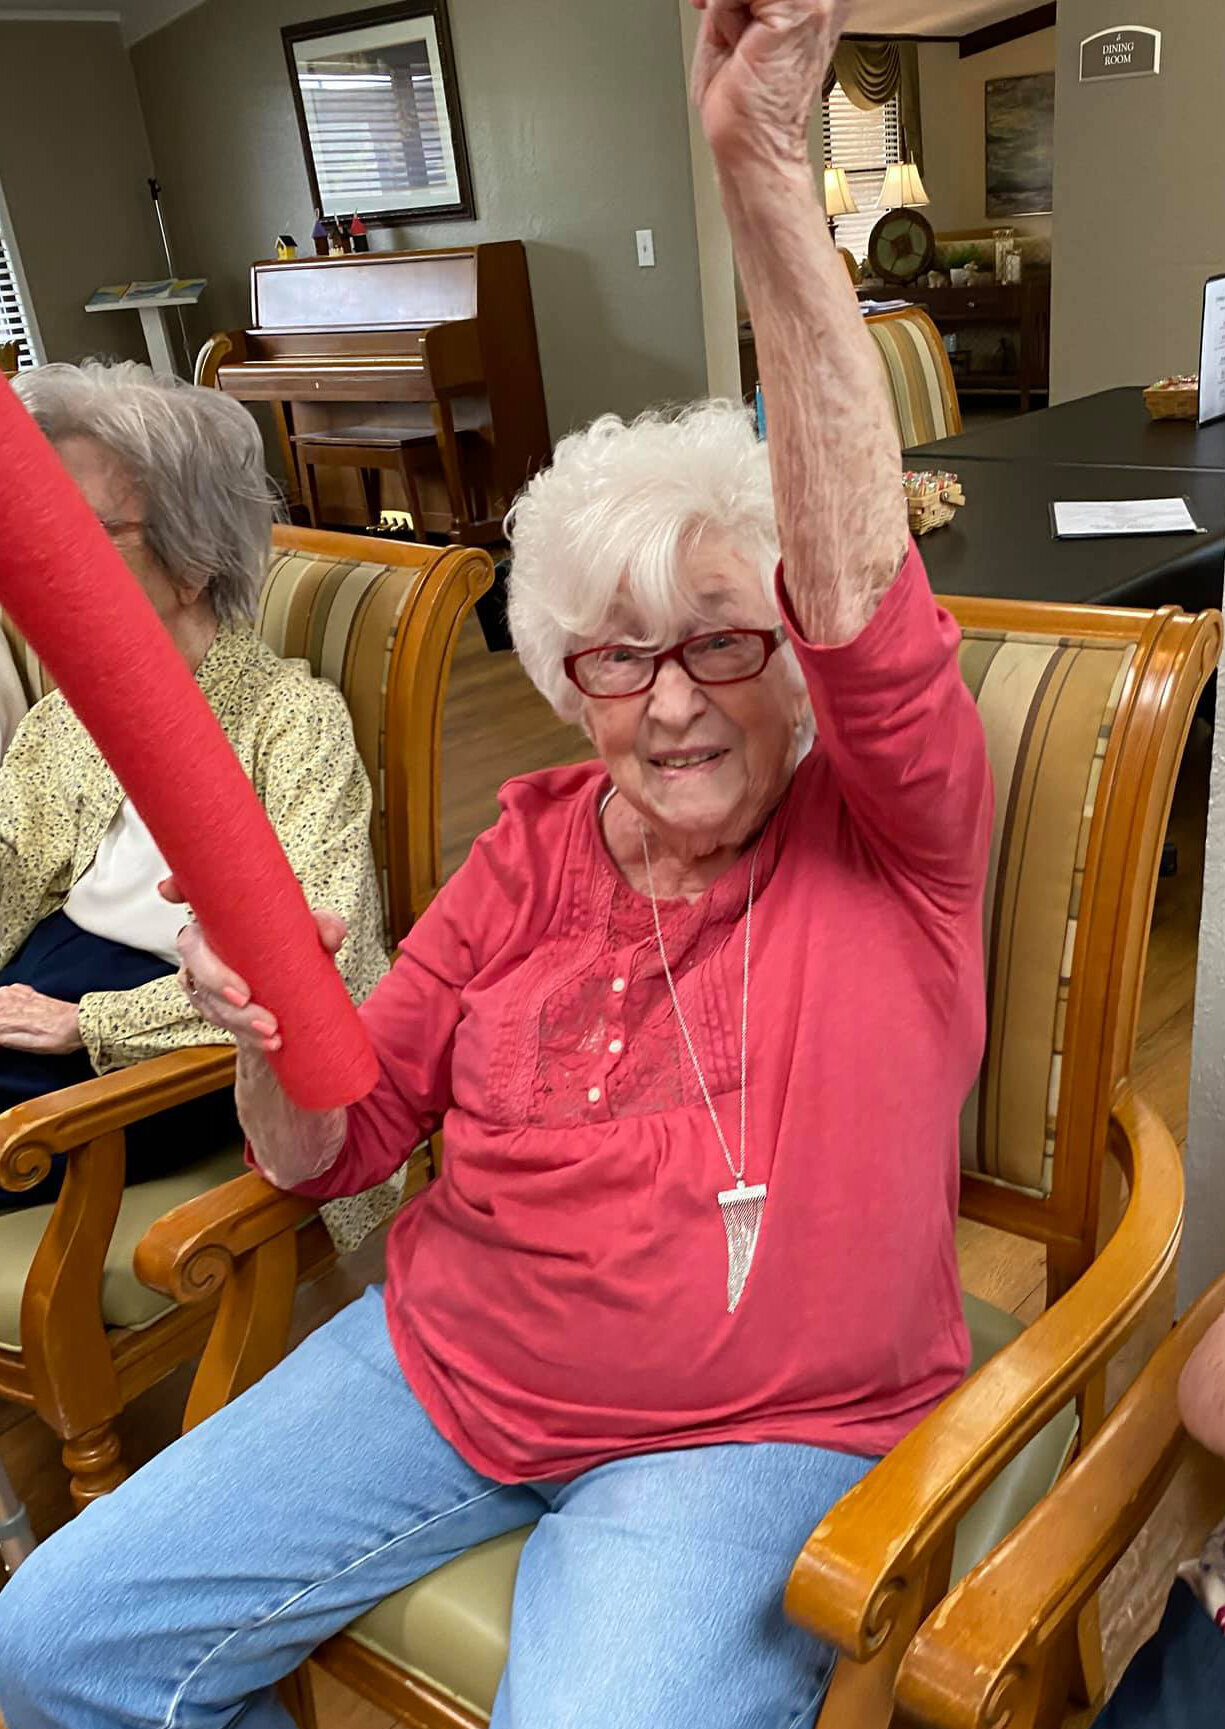 Springfield Assisted Living - Activities